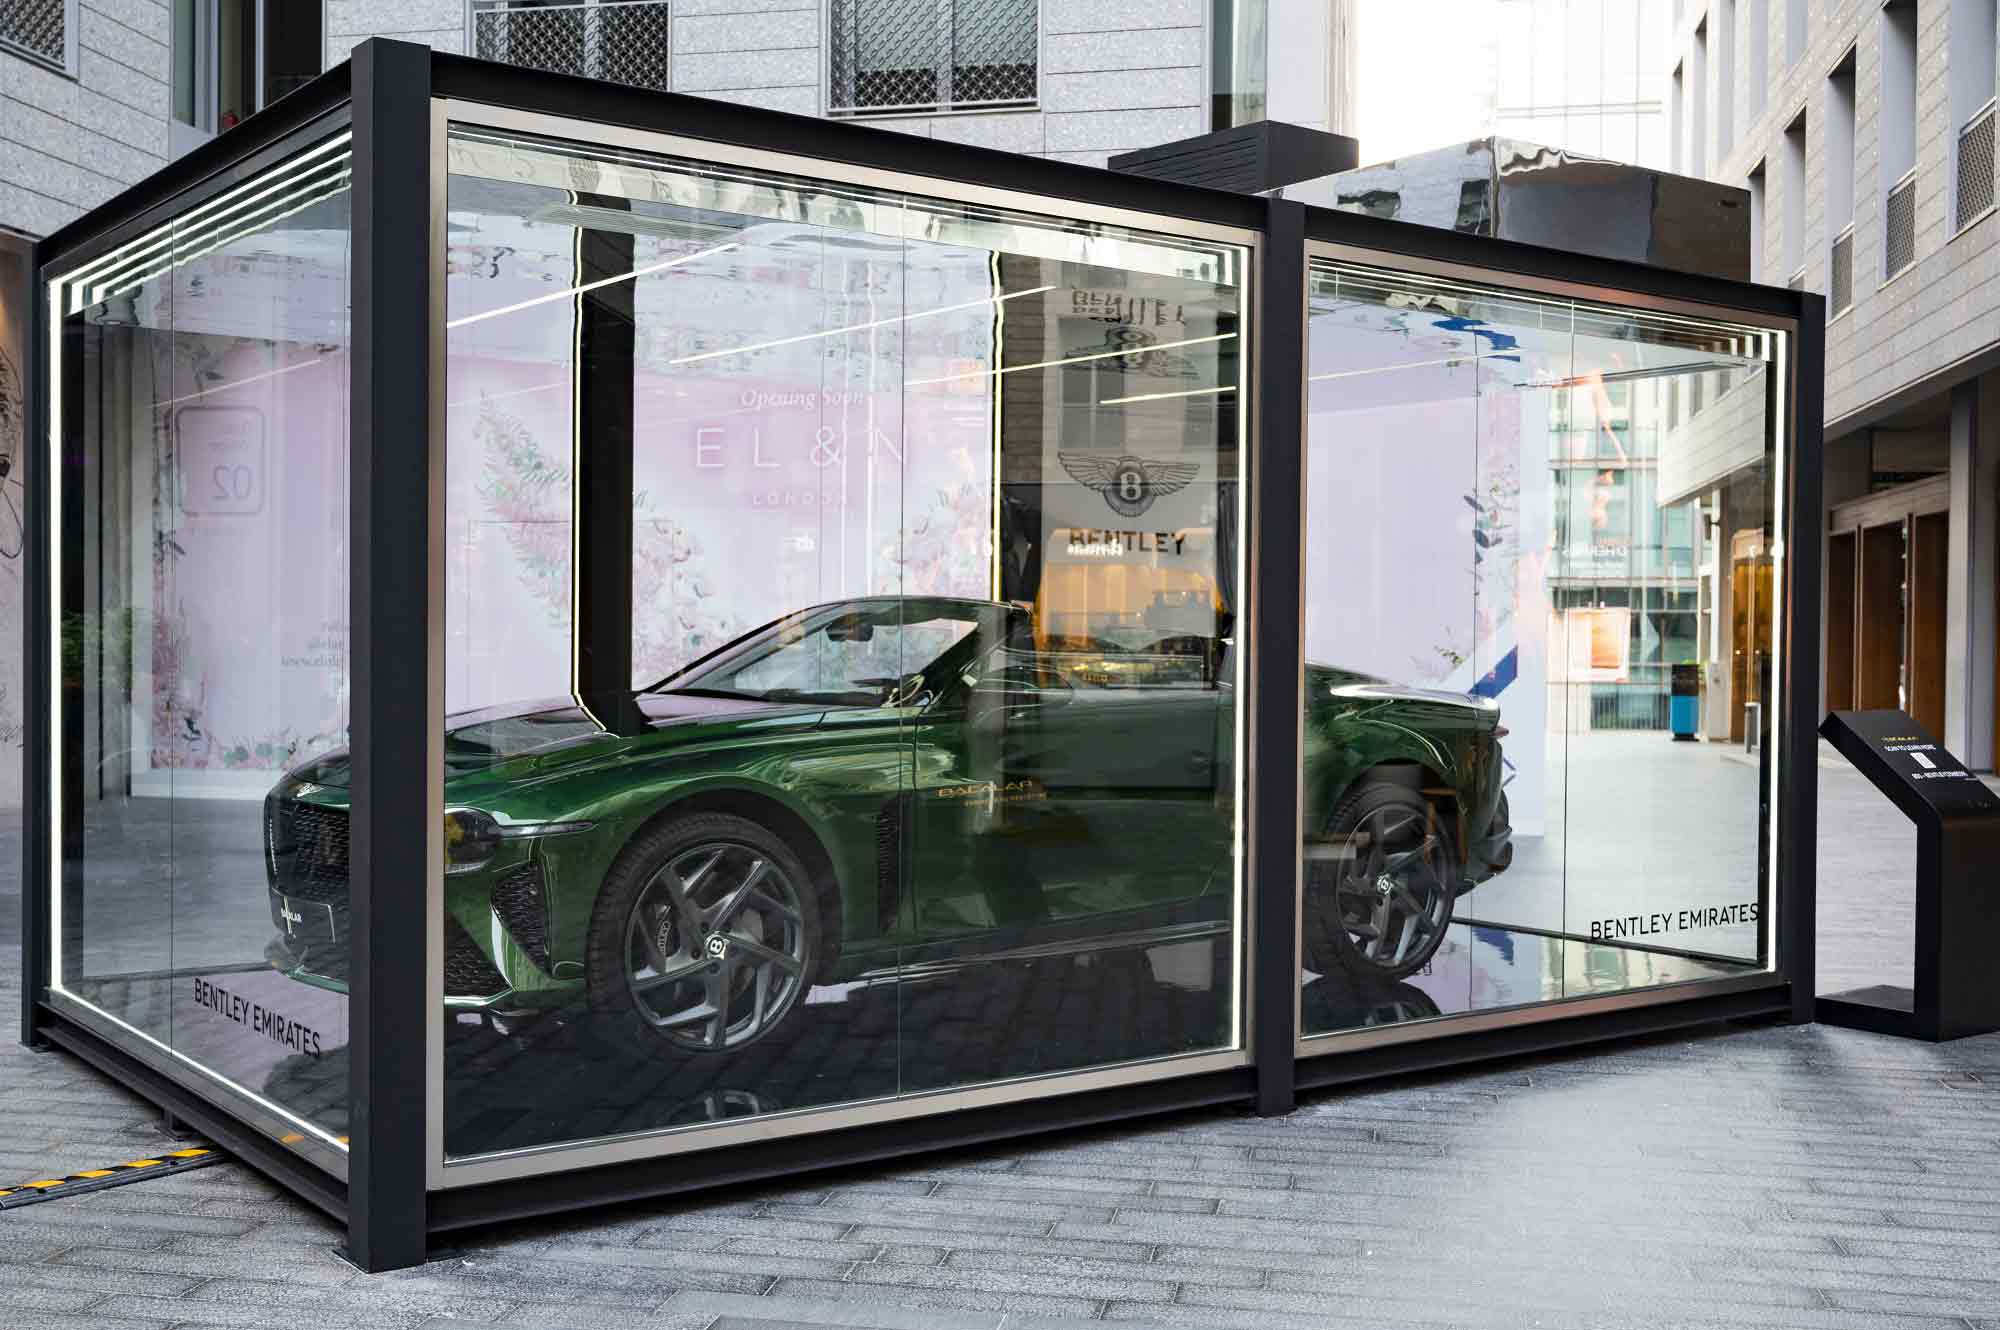 Bentley’s pinnacle of coachbuilding, the bacalar, has been exhibited for the first time in the uae